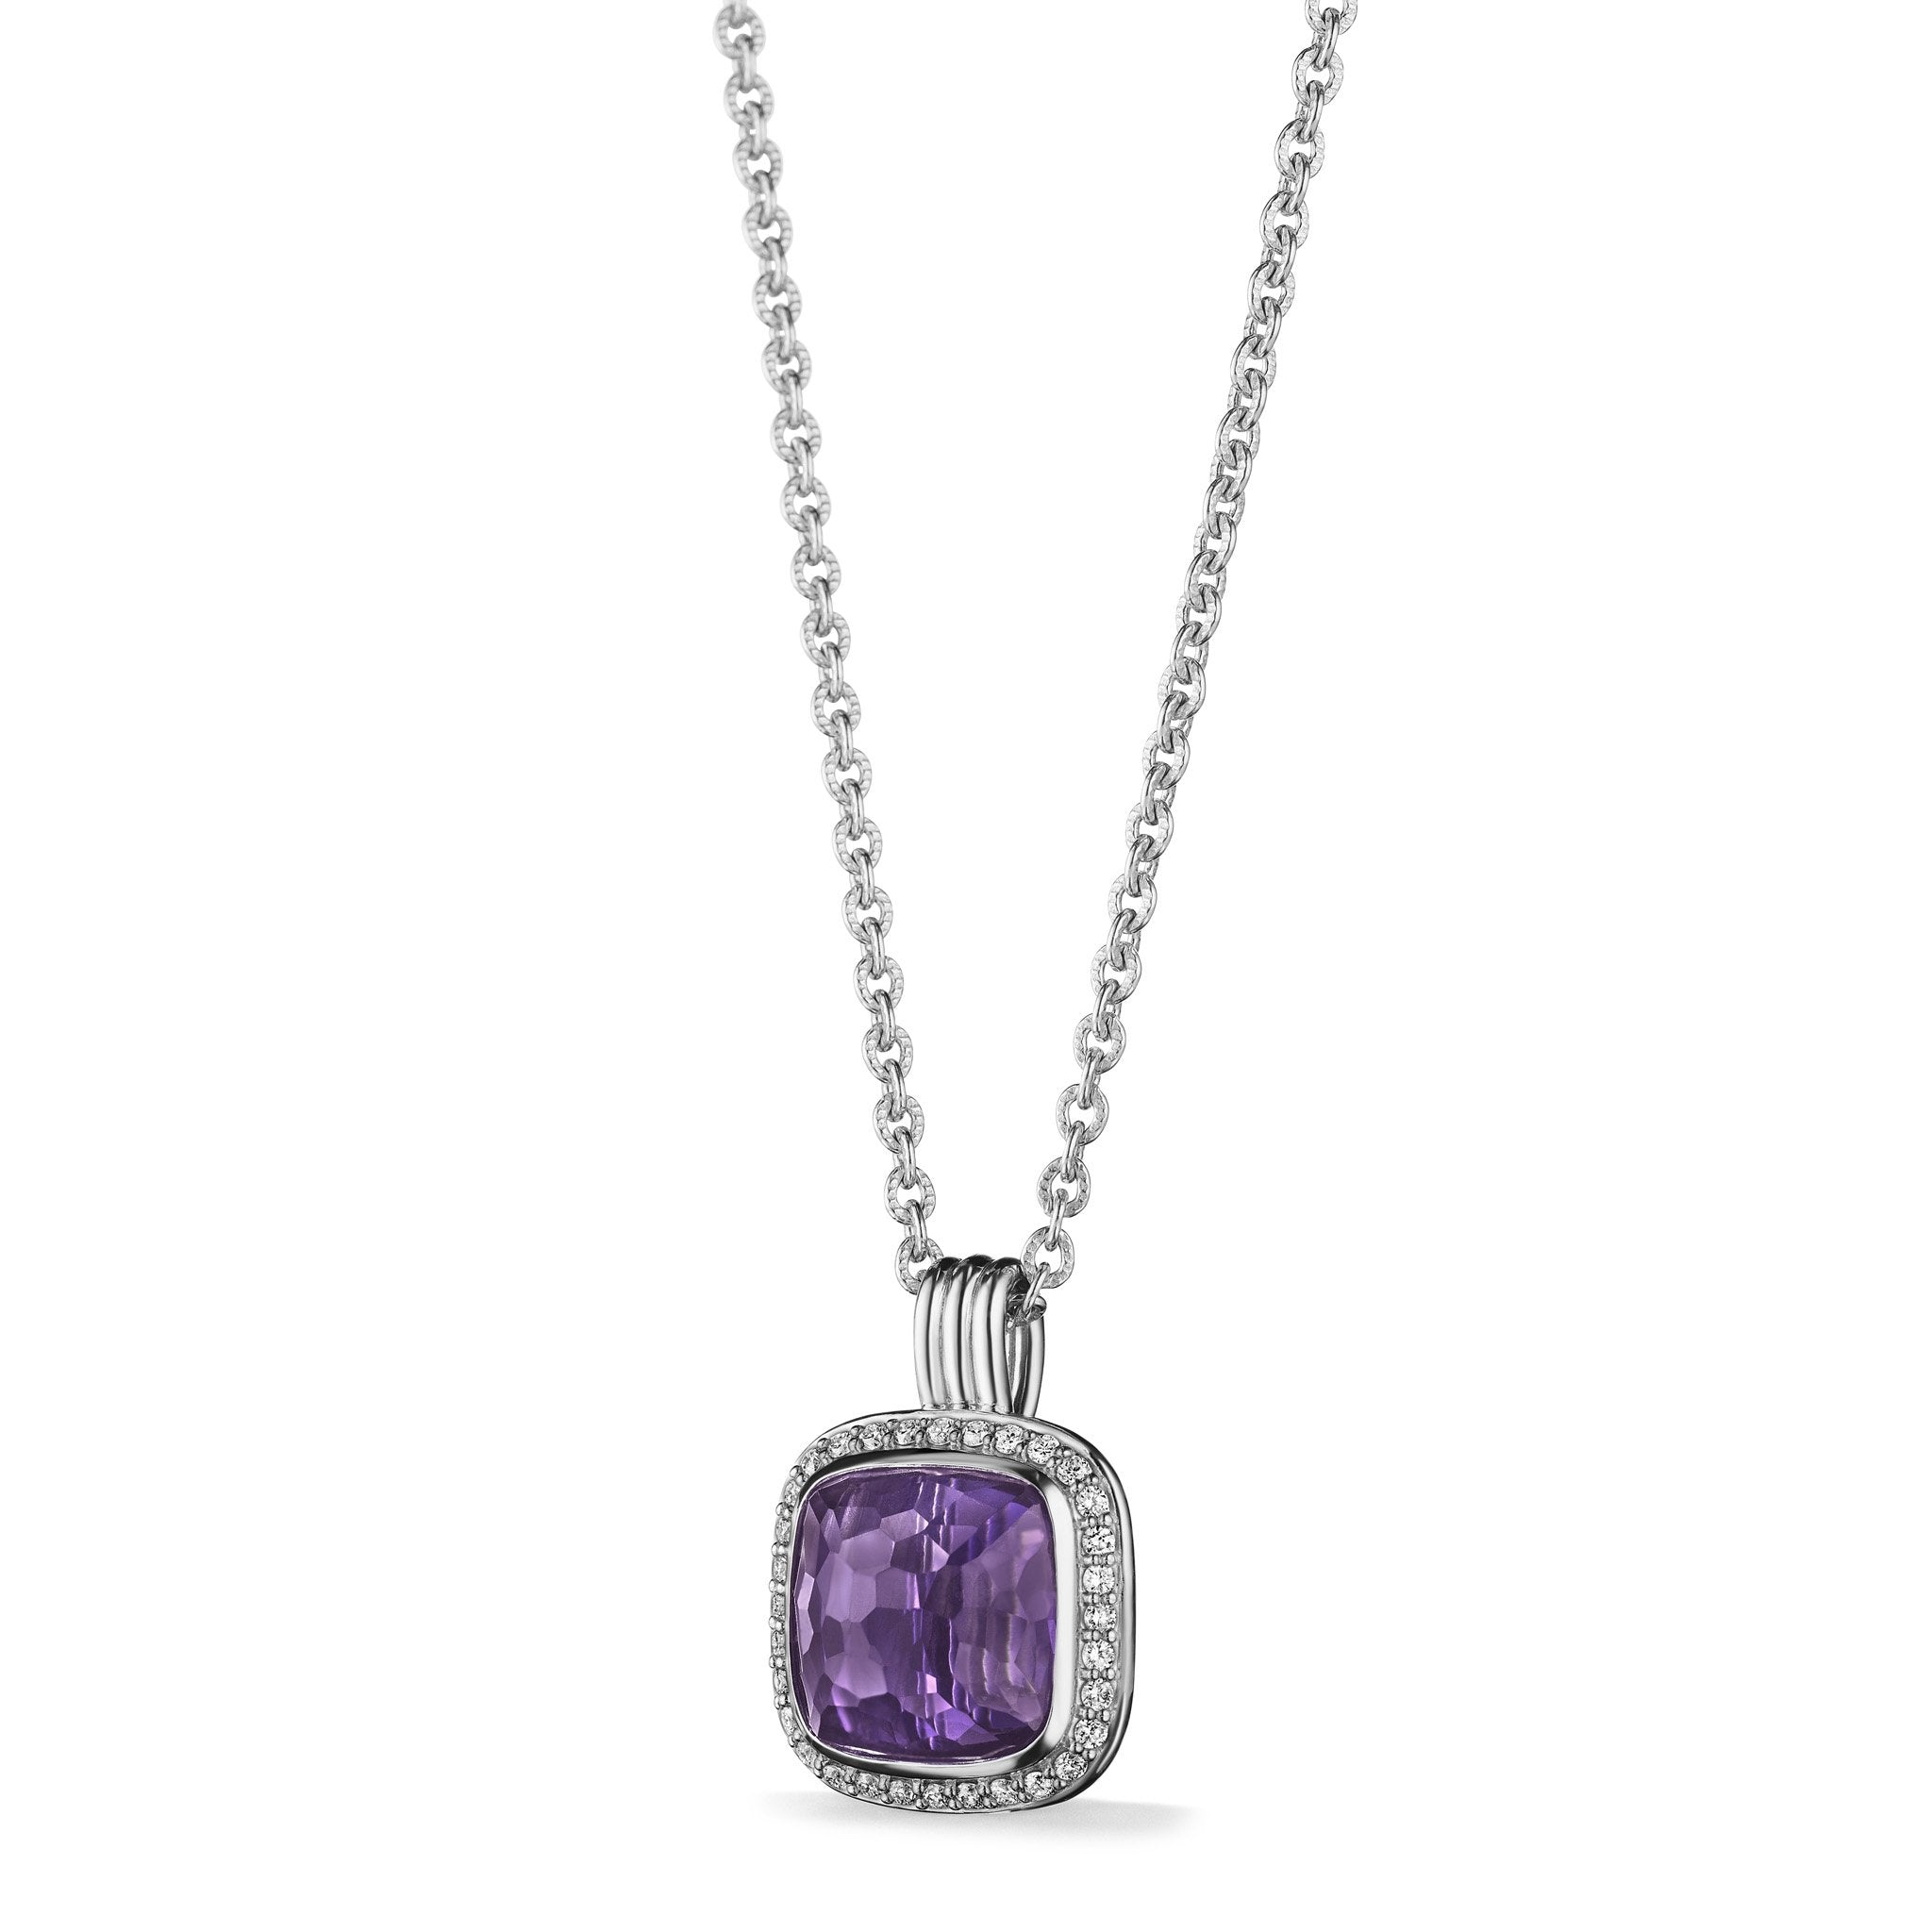 Cassandre Necklace with Amethyst and Diamonds